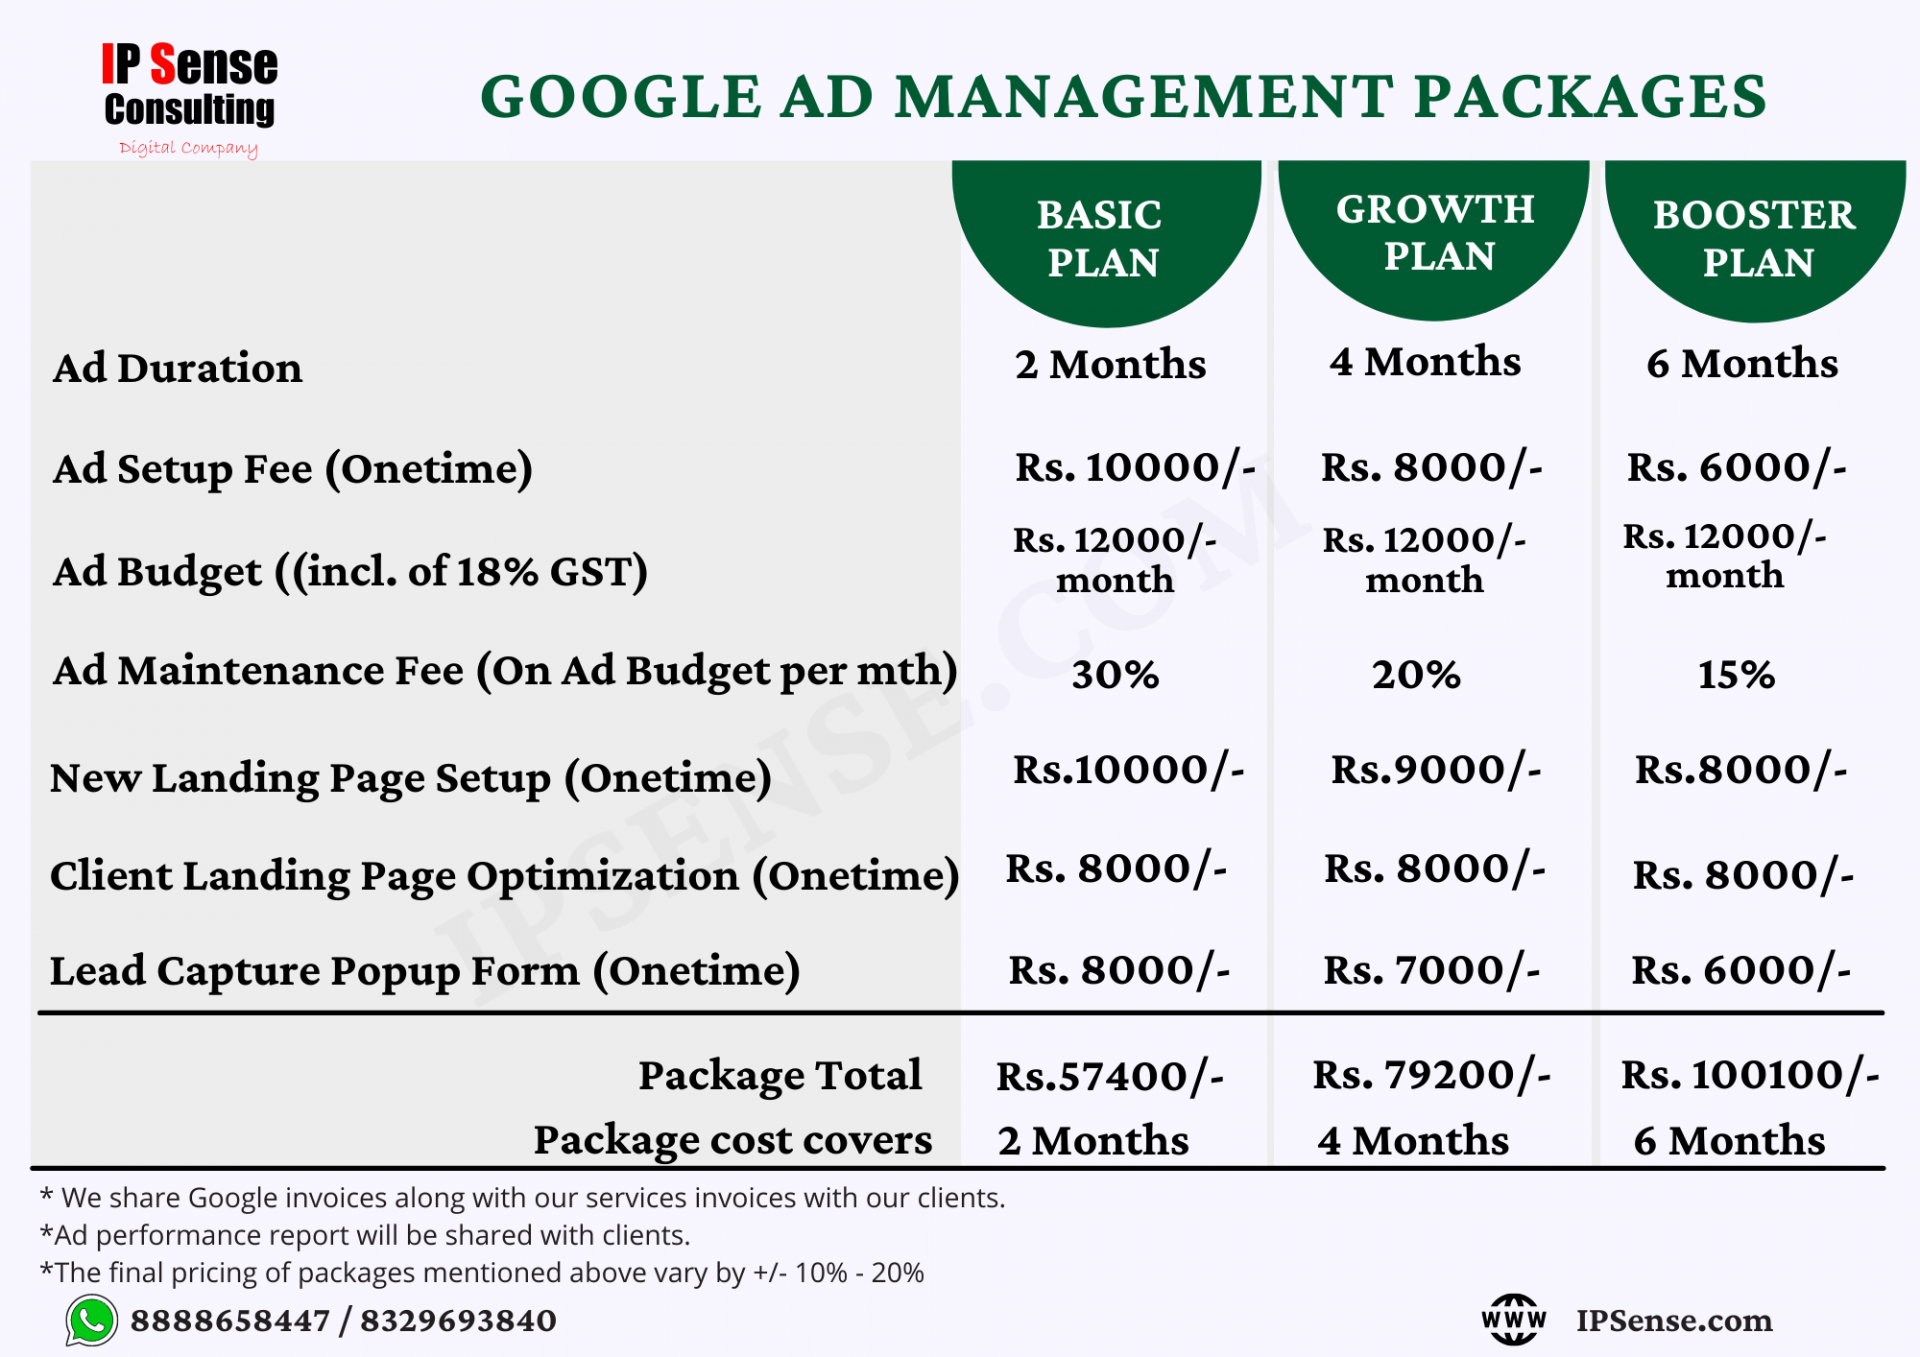 google ad packages - ipsense google ads pricing packages - Google Ad Packages